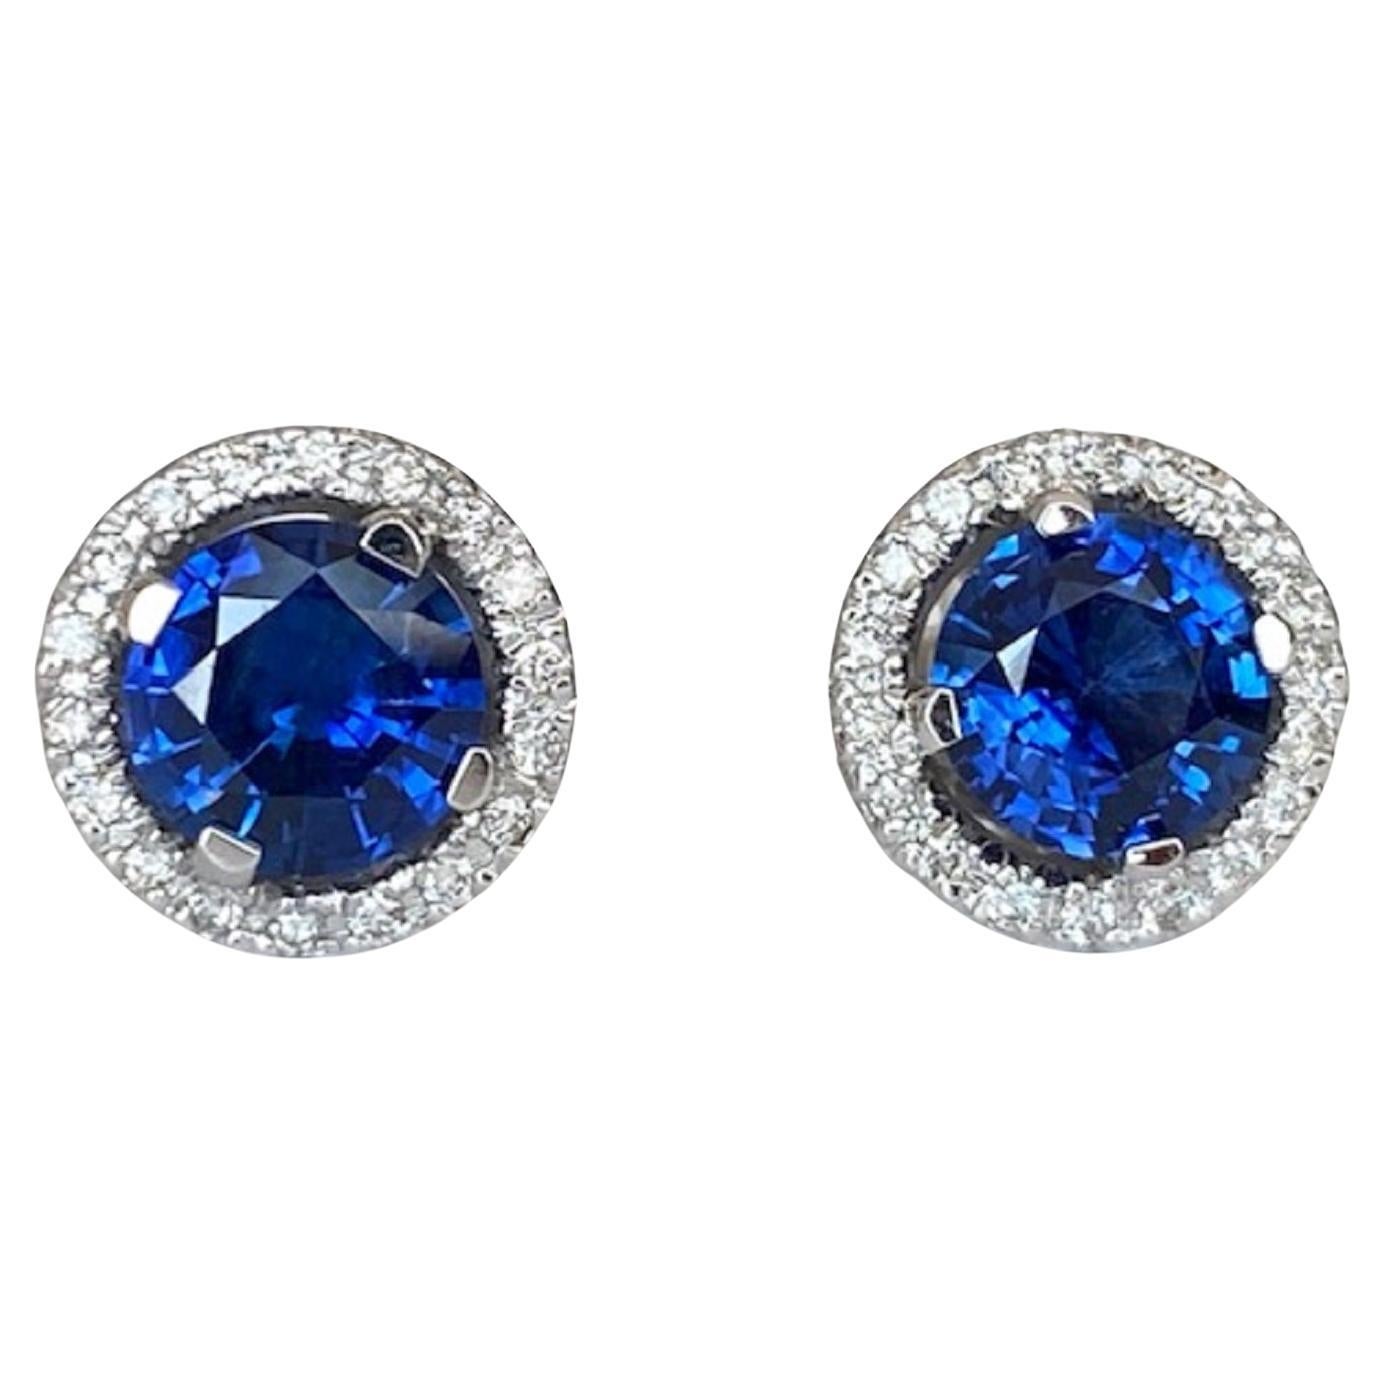 ALGT Certified 18 Kt. White Gold Earrings with 1.62 Ct Sapphires and Diamonds For Sale